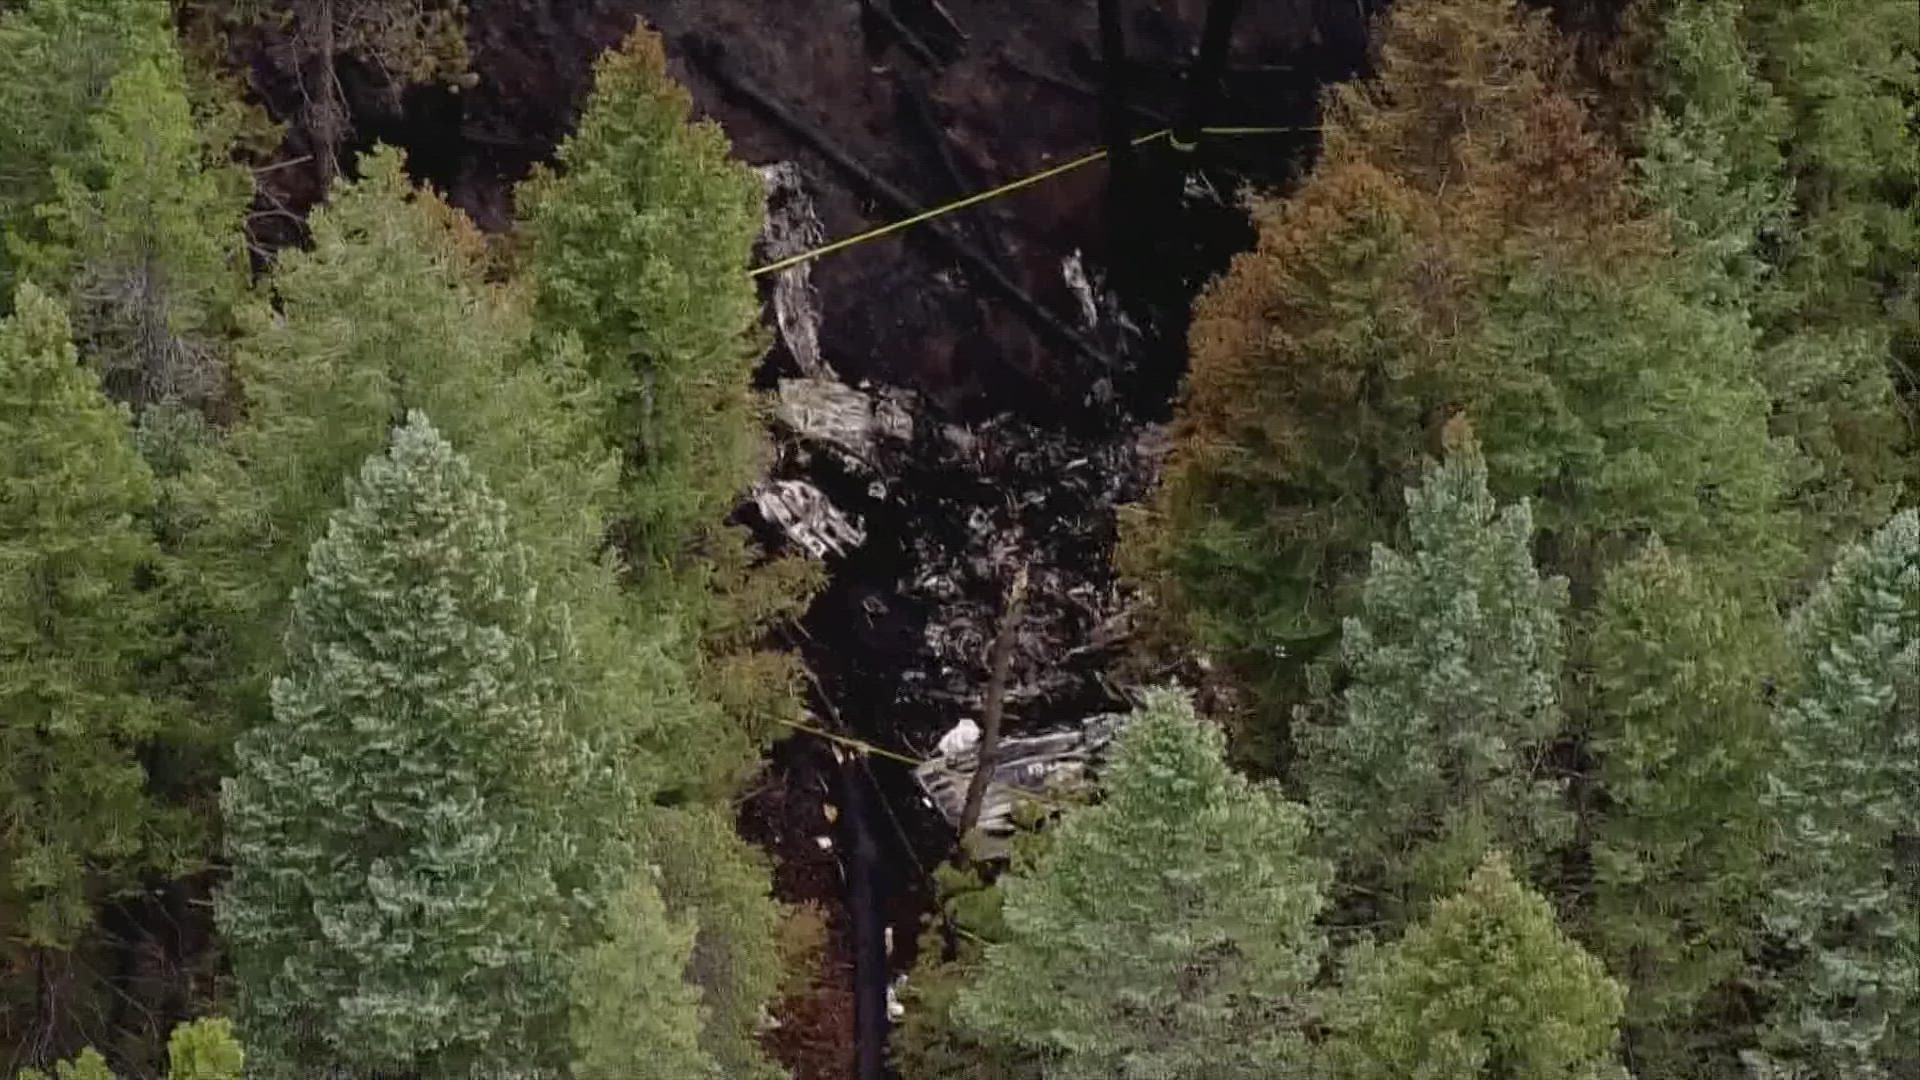 The plane that crashed into a hillside in Boulder County Sunday was used by a company giving tours along the Front Range.